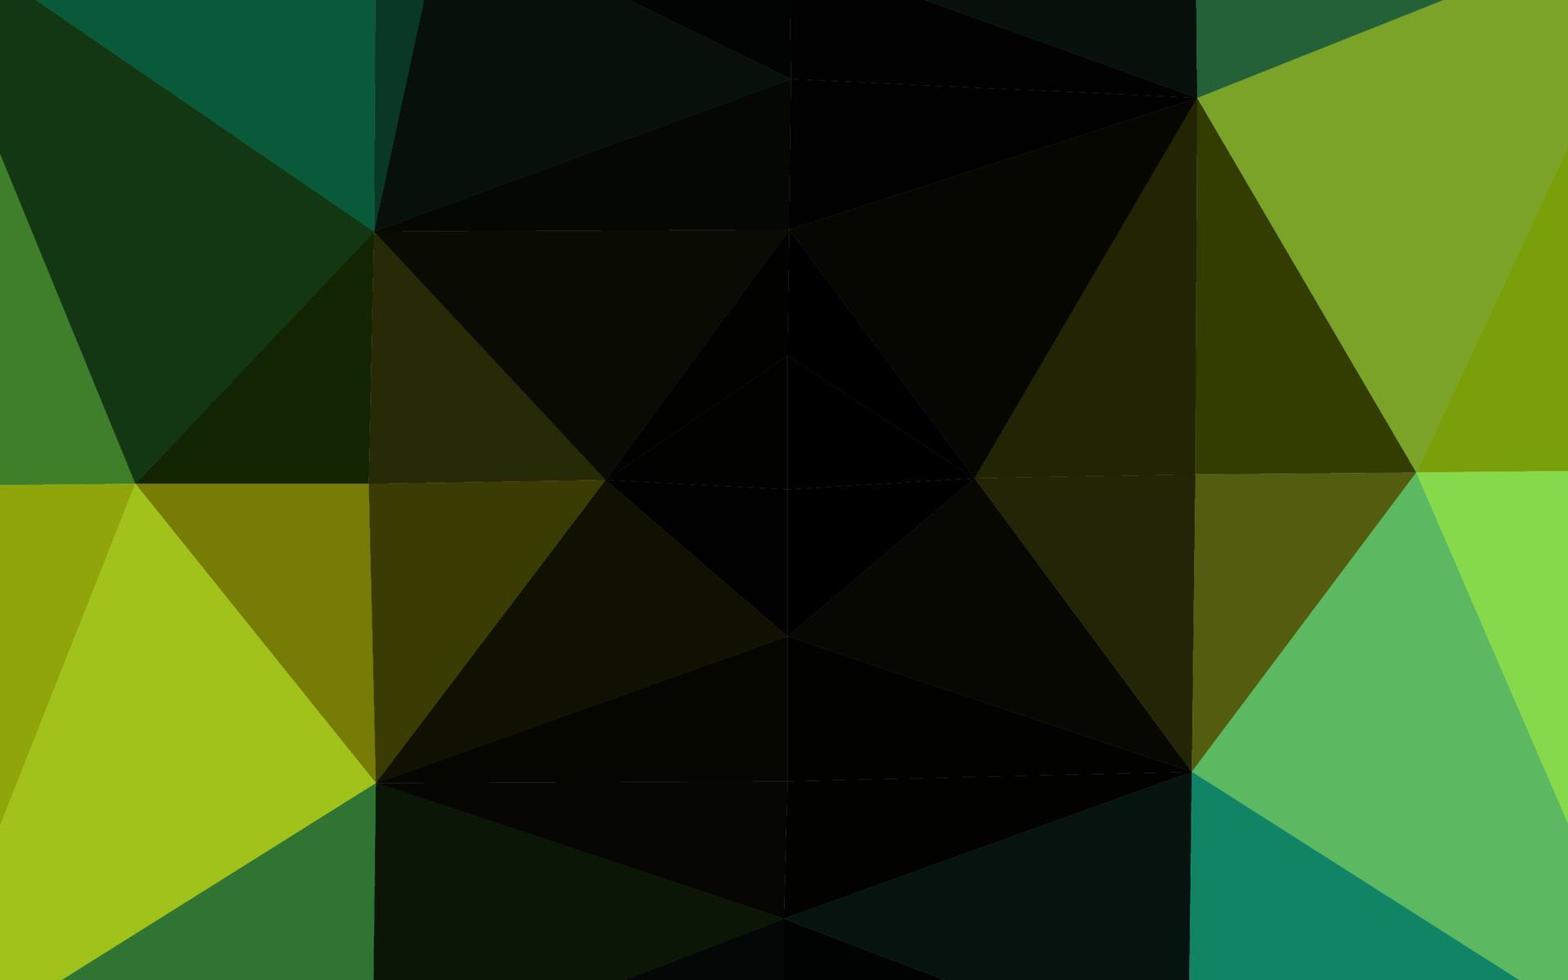 Light Green, Yellow vector low poly texture.